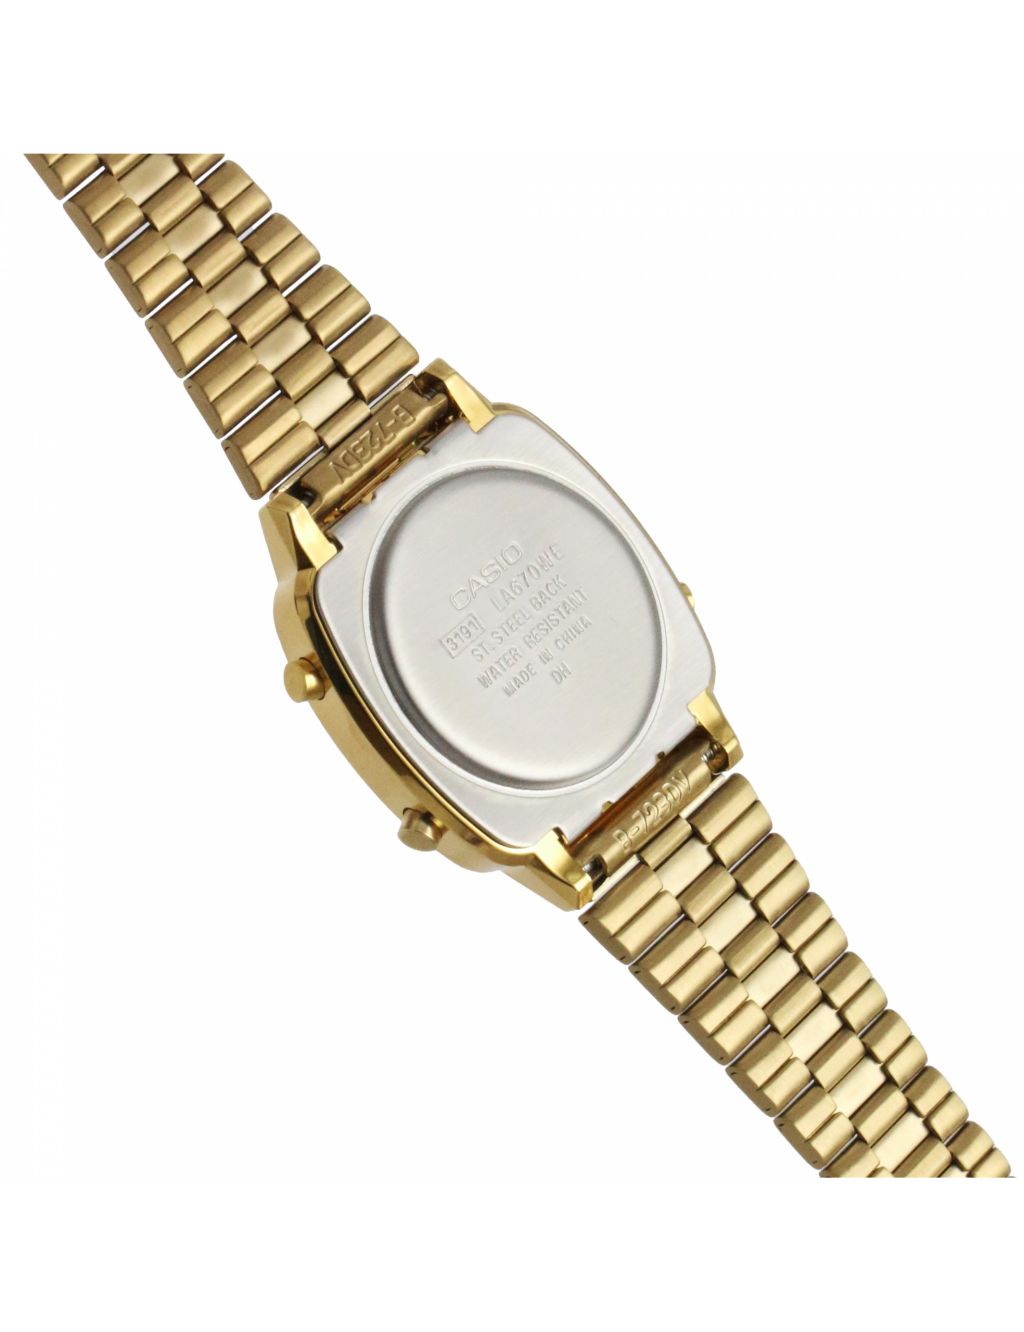 Casio Classic Collection Chronograph Metal Bracelet Watch image 4